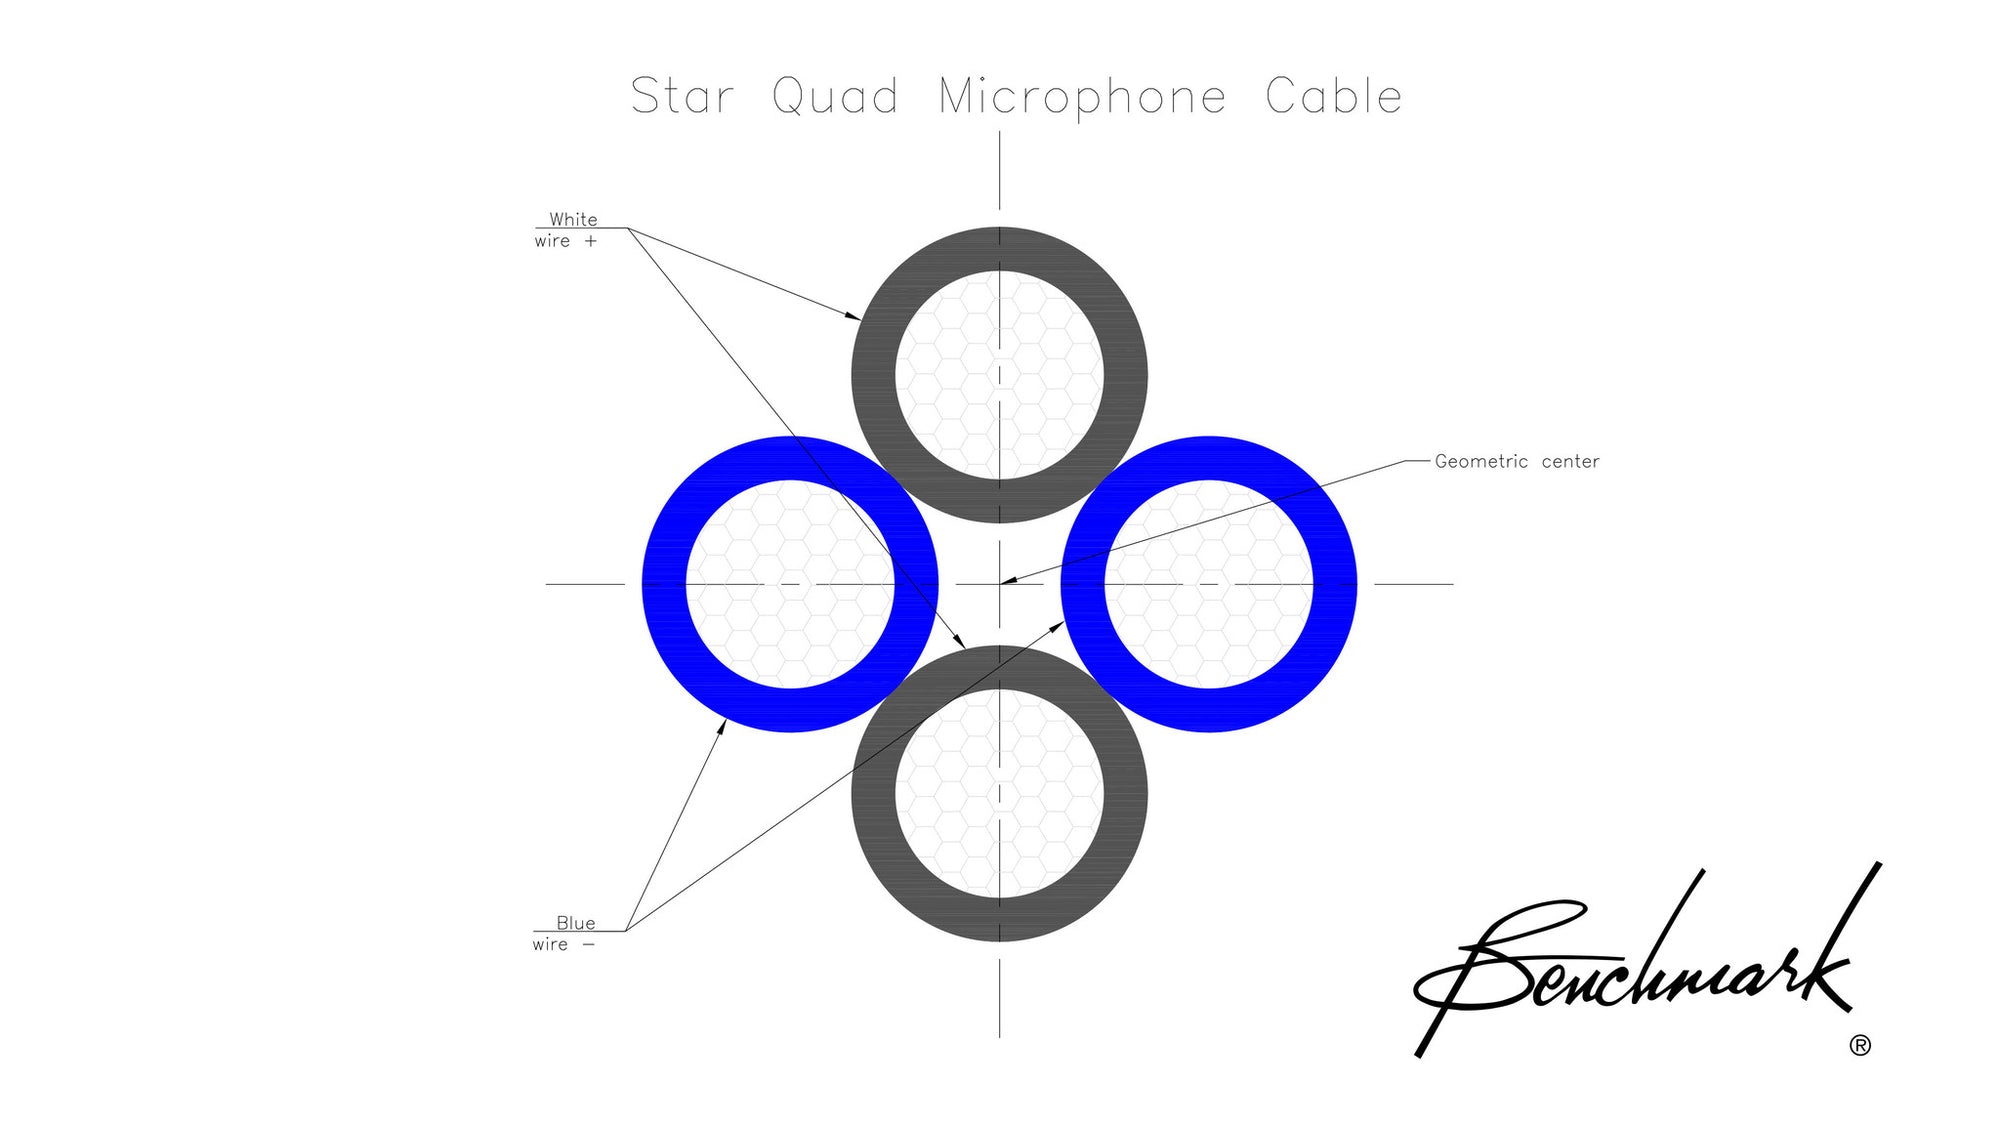 Star-Quad 4-wire construction. Pairs shown in the star configuration used inside the cable. Pairs share a common geometric center.